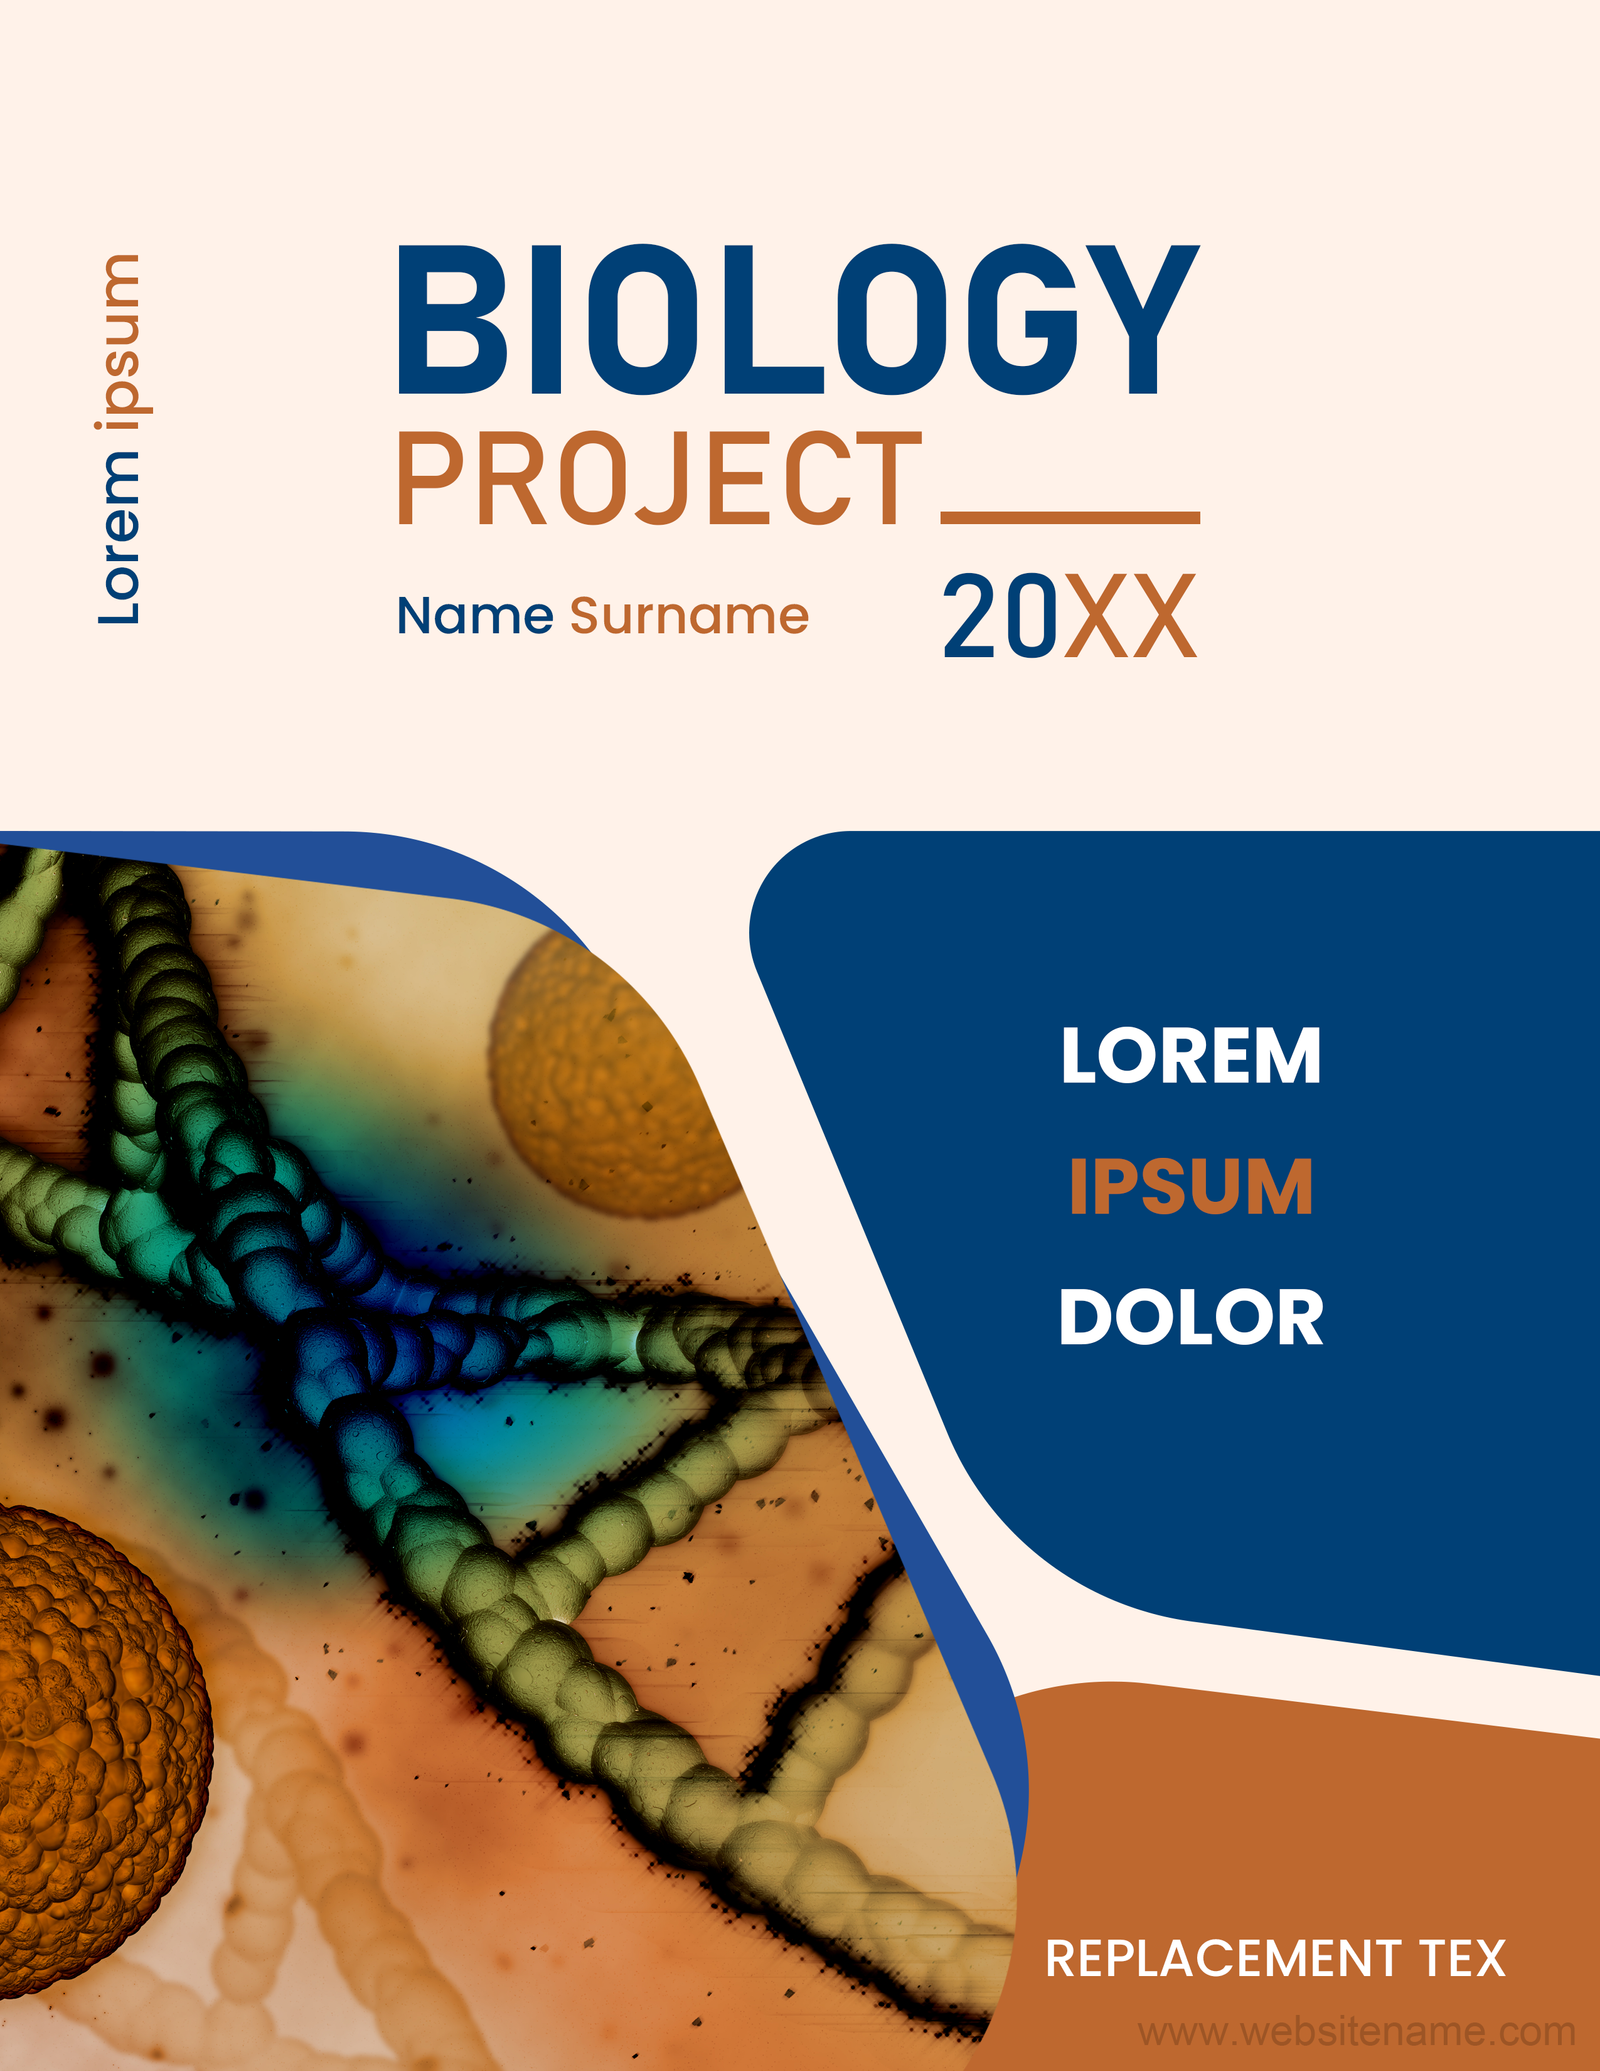 Biology project front page designs | MS Word Cover Page Templates